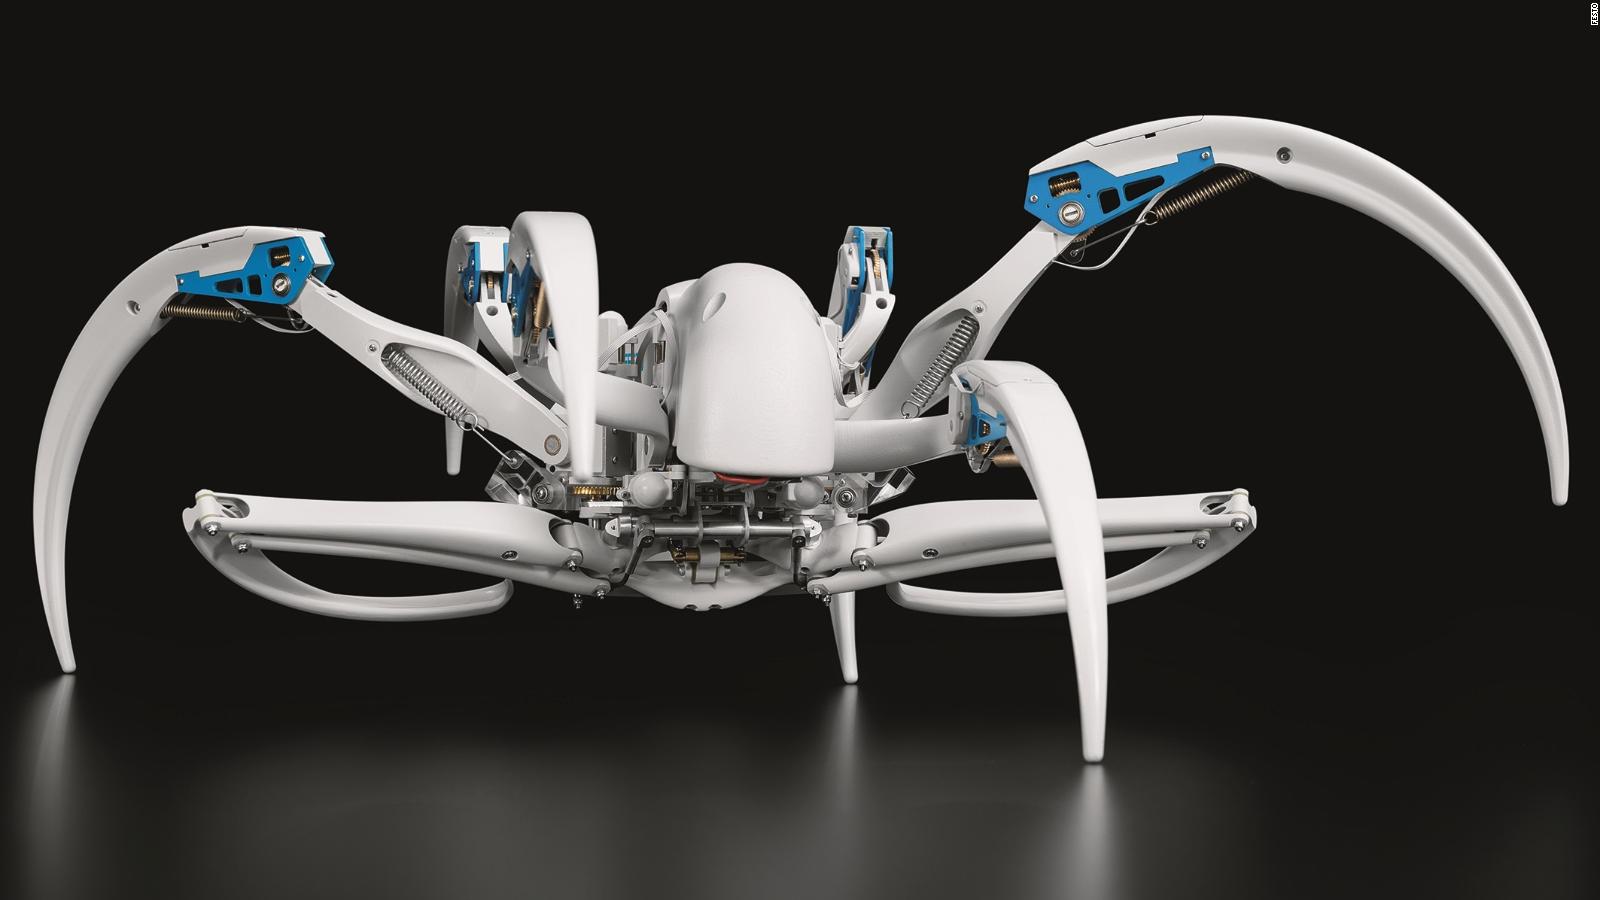 Festo's fantastical robots inspired by 